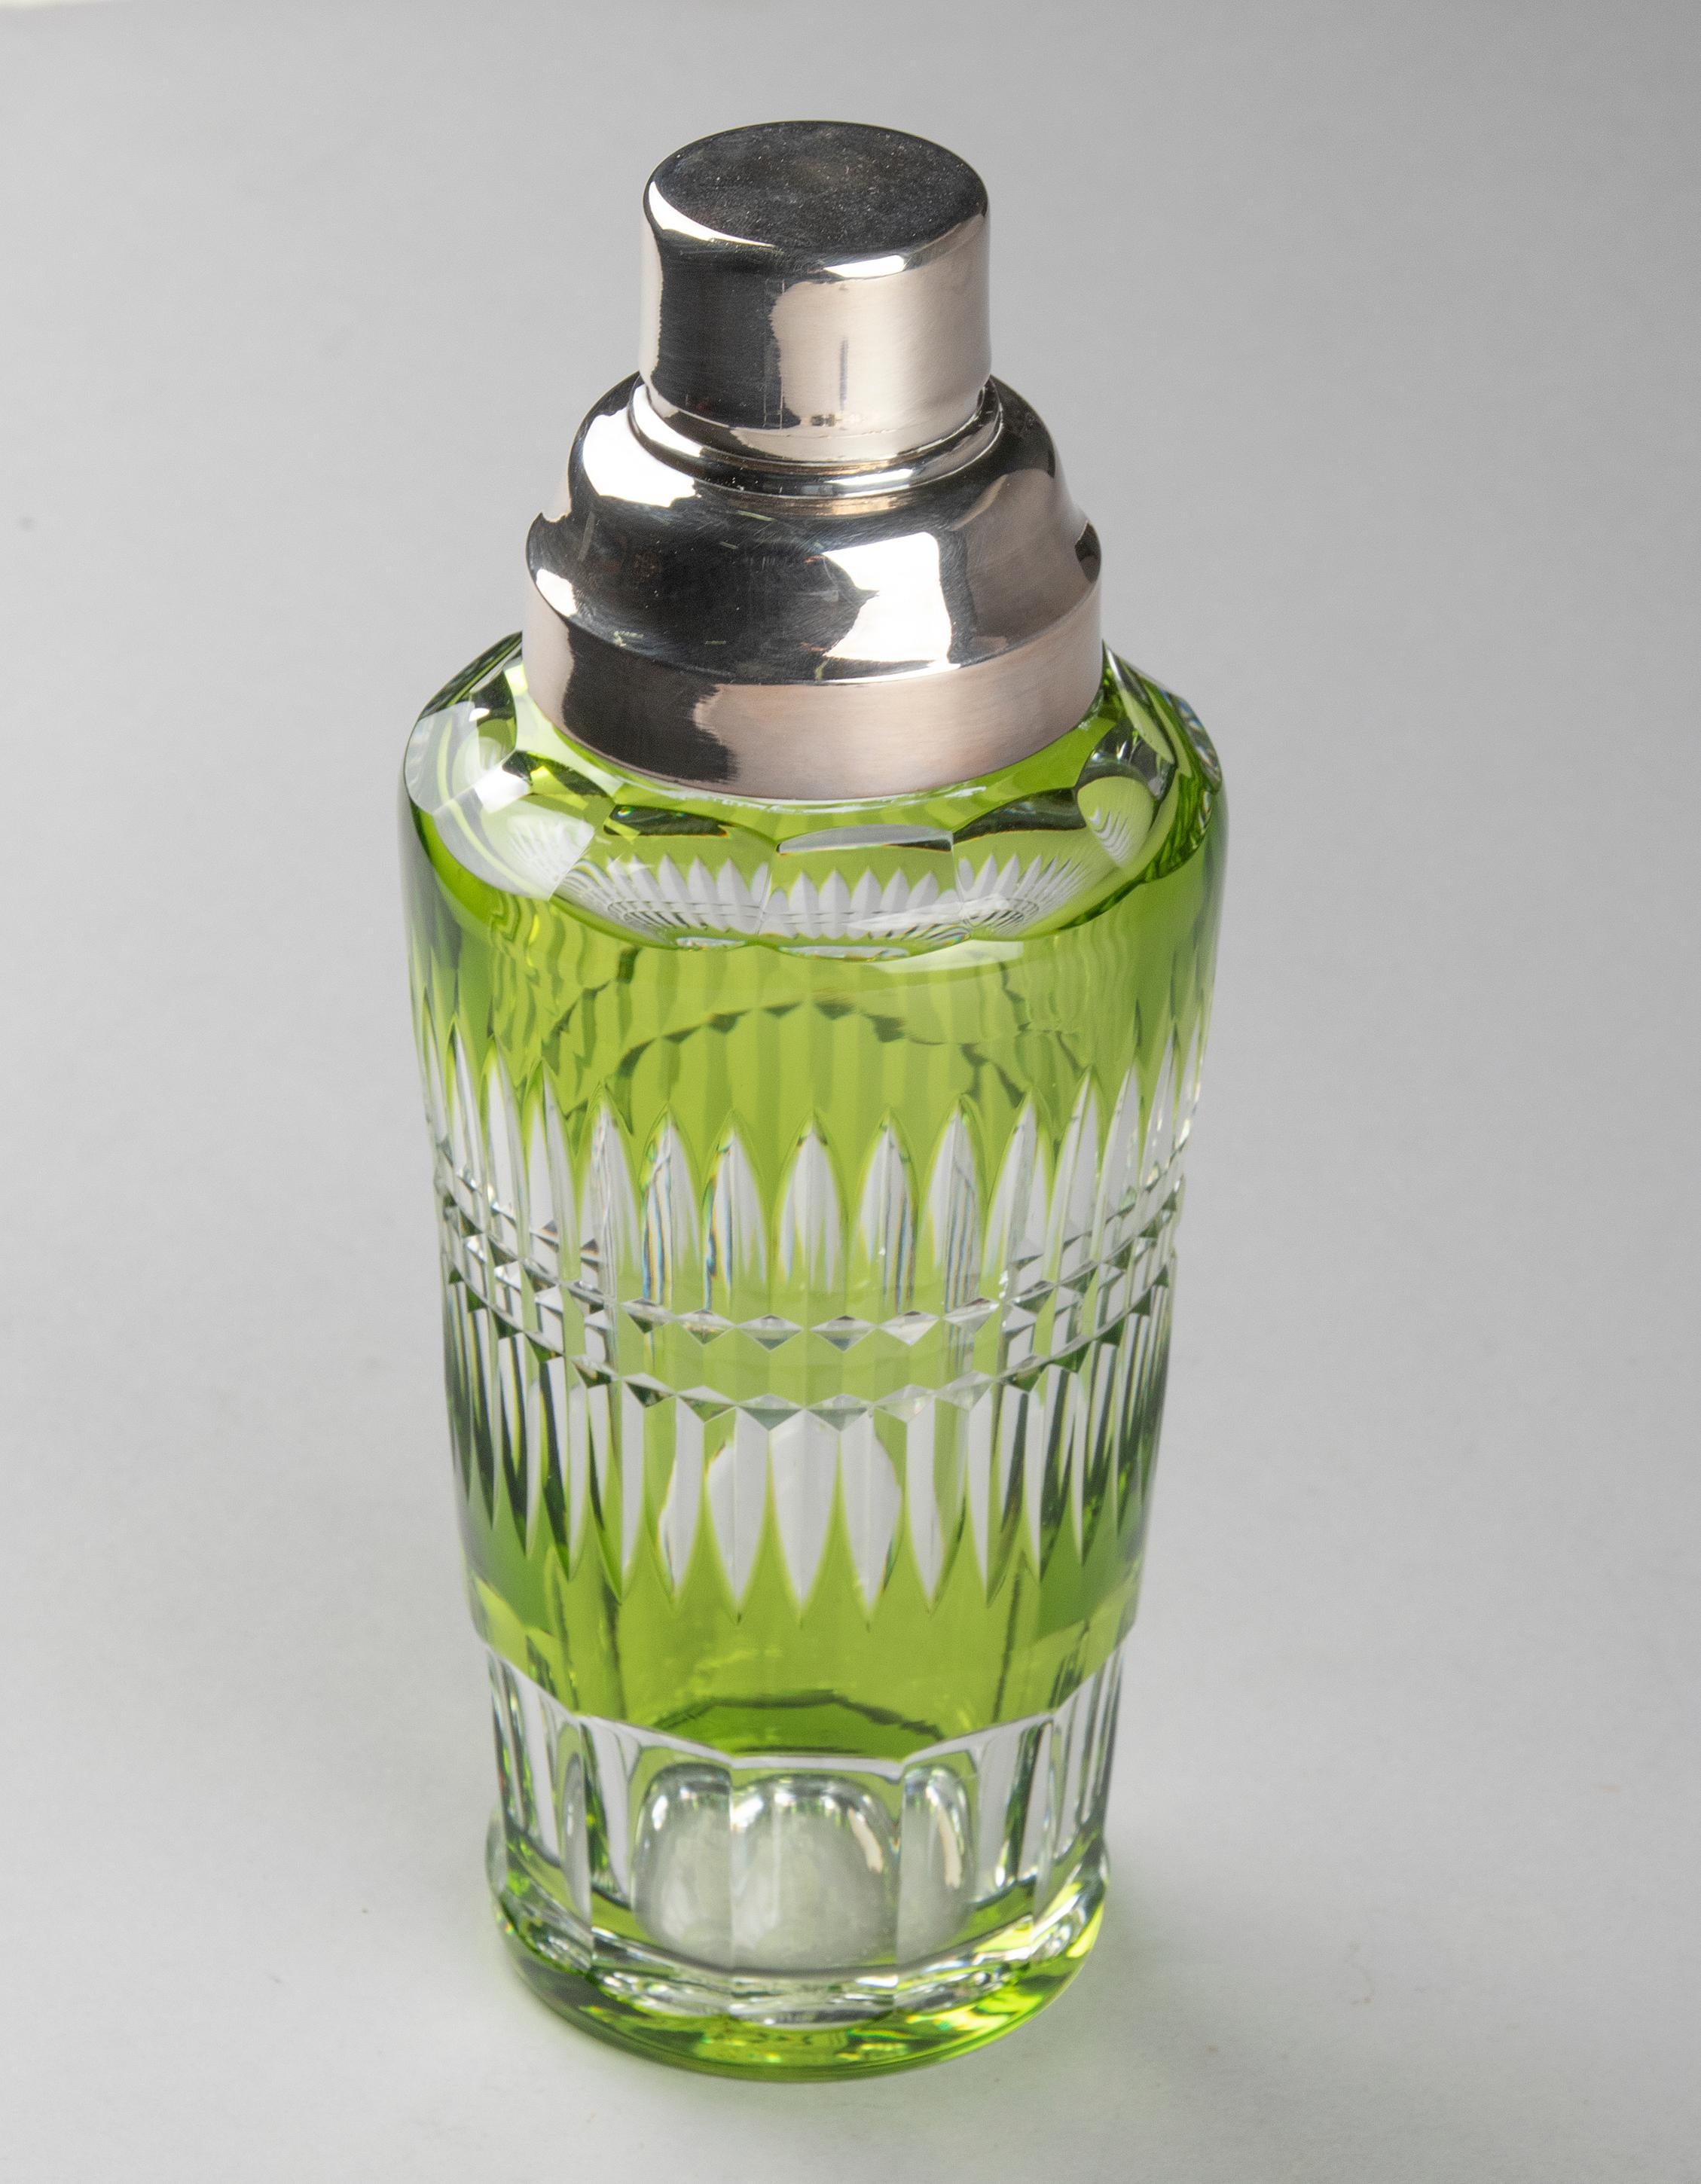 Beautiful crystal cocktail shaker from the Belgian brand Val Saint Lambert. The cocktail shaker has a beautiful green color and is cut all around with a deep striped pattern. The cap is silver plated. This cocktail shaker is quite rare, they are